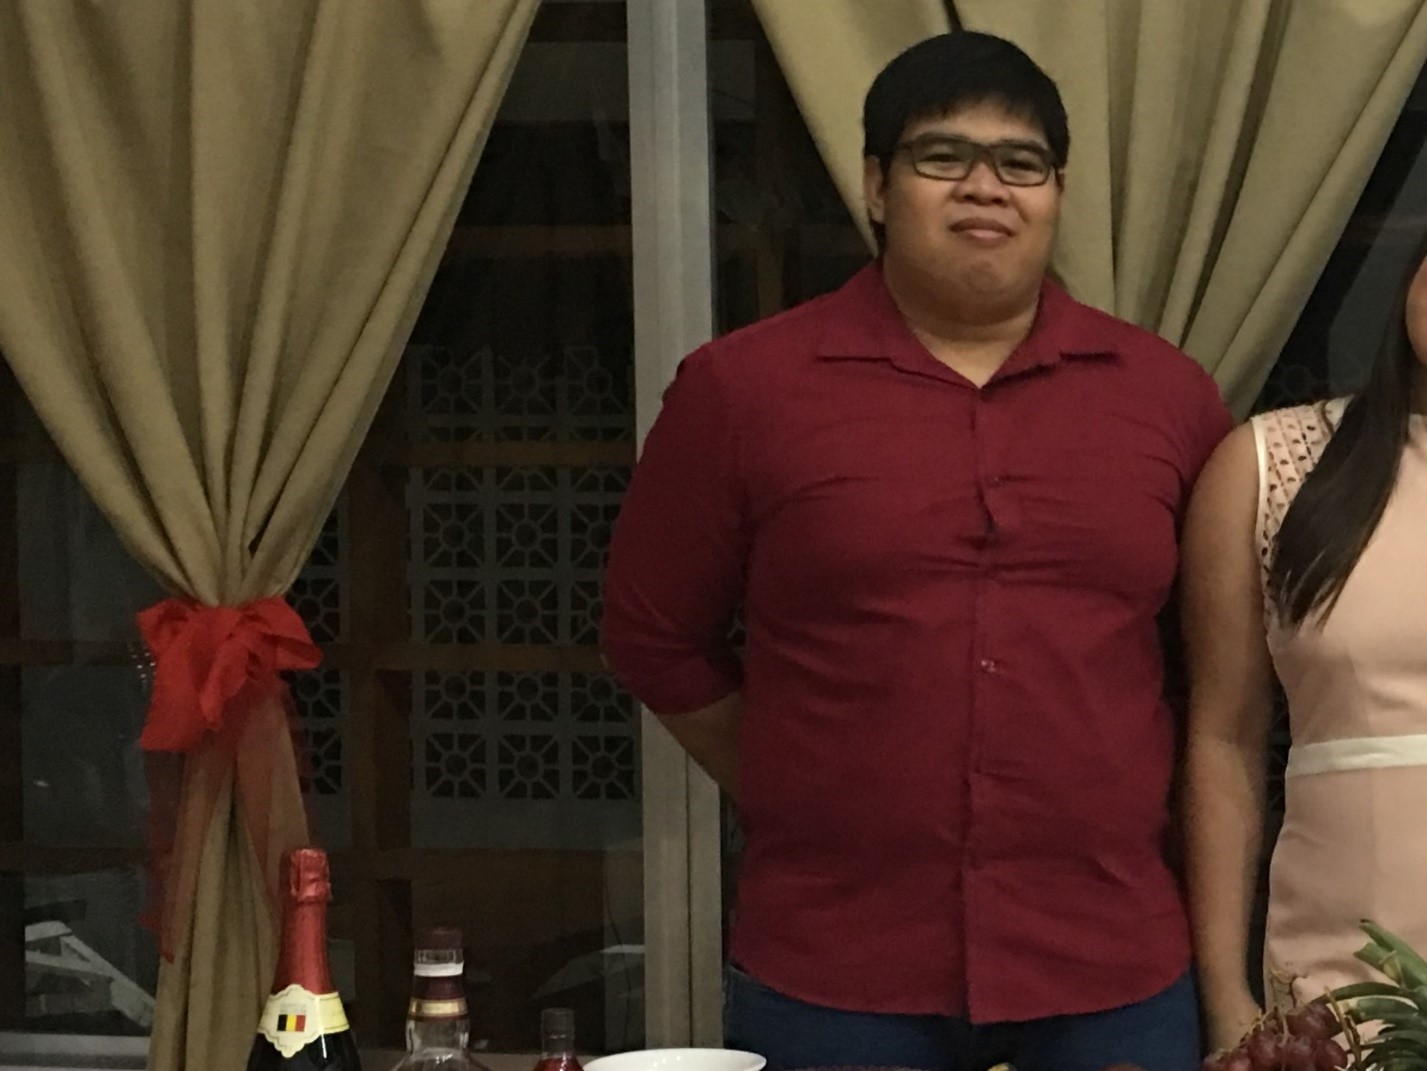 As a kid, Clarence Isulat was always into basketball but after a shoulder injury dashed his hopes, he managed to find some semblance of hope in intermittent fasting